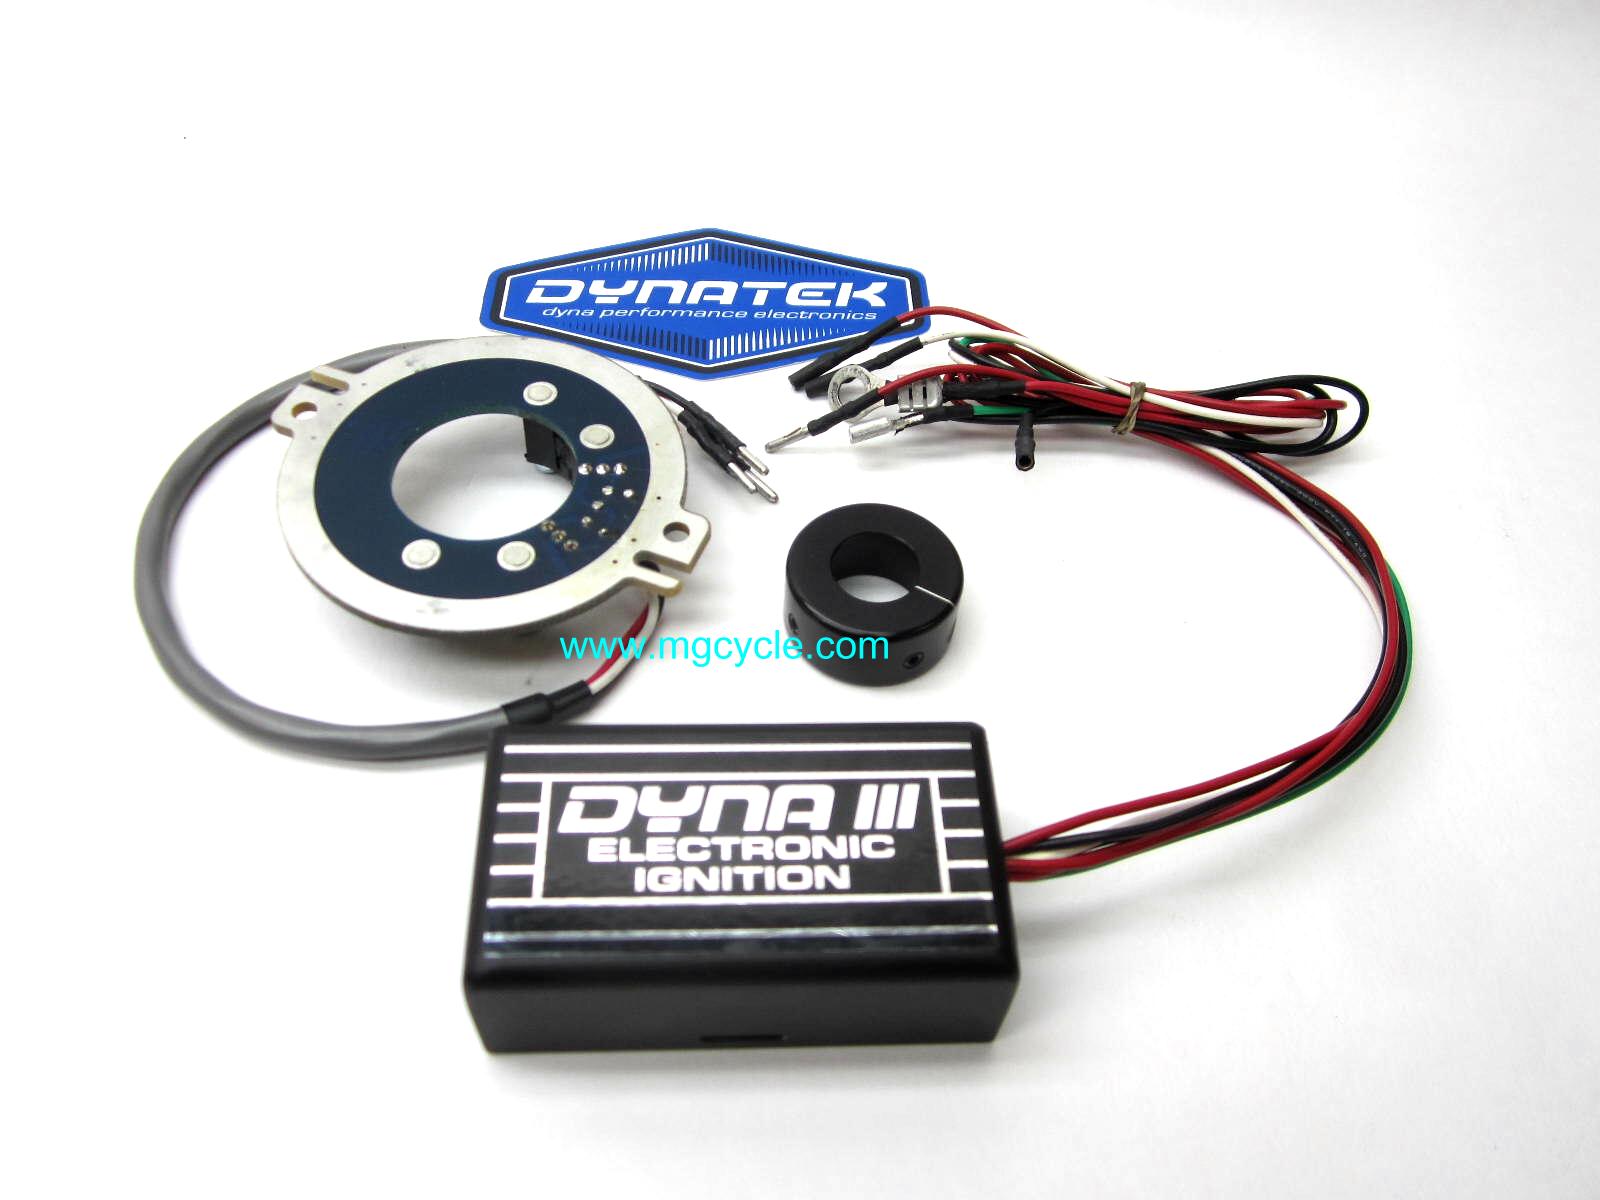 DYNA III electronic ignition, twin point big twins - Click Image to Close